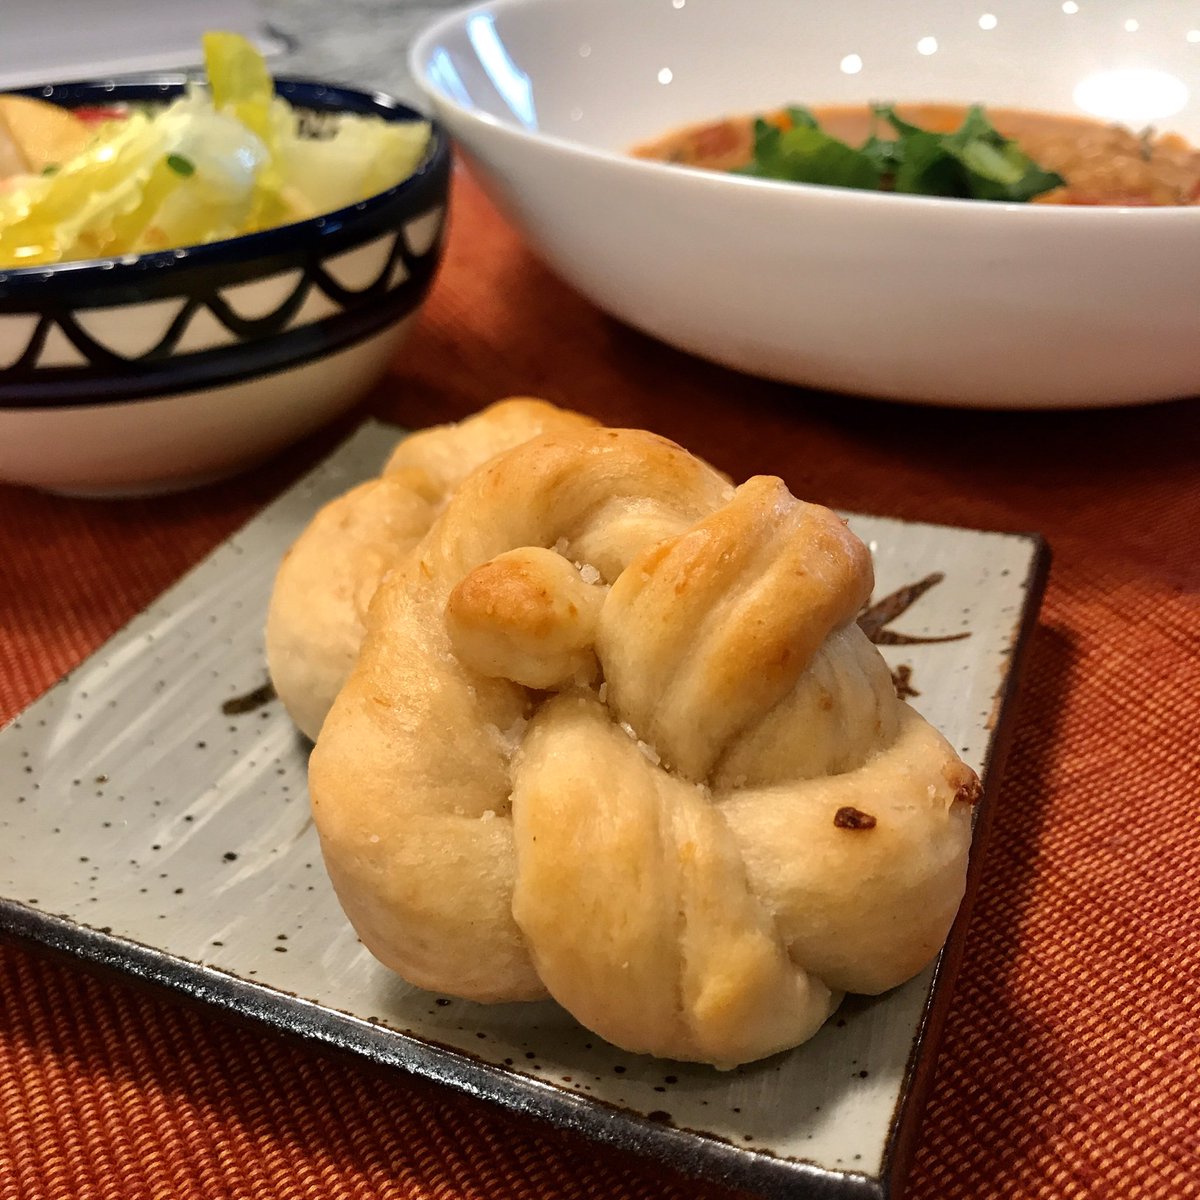 Bread #33. Garlic Knots. I think these set a new household record by being completely gone in 2-ish hours. Fast and addictive. Would make again and double the recipe. It’s been a fun game to slowly watch my manicure die during this time of social distancing 